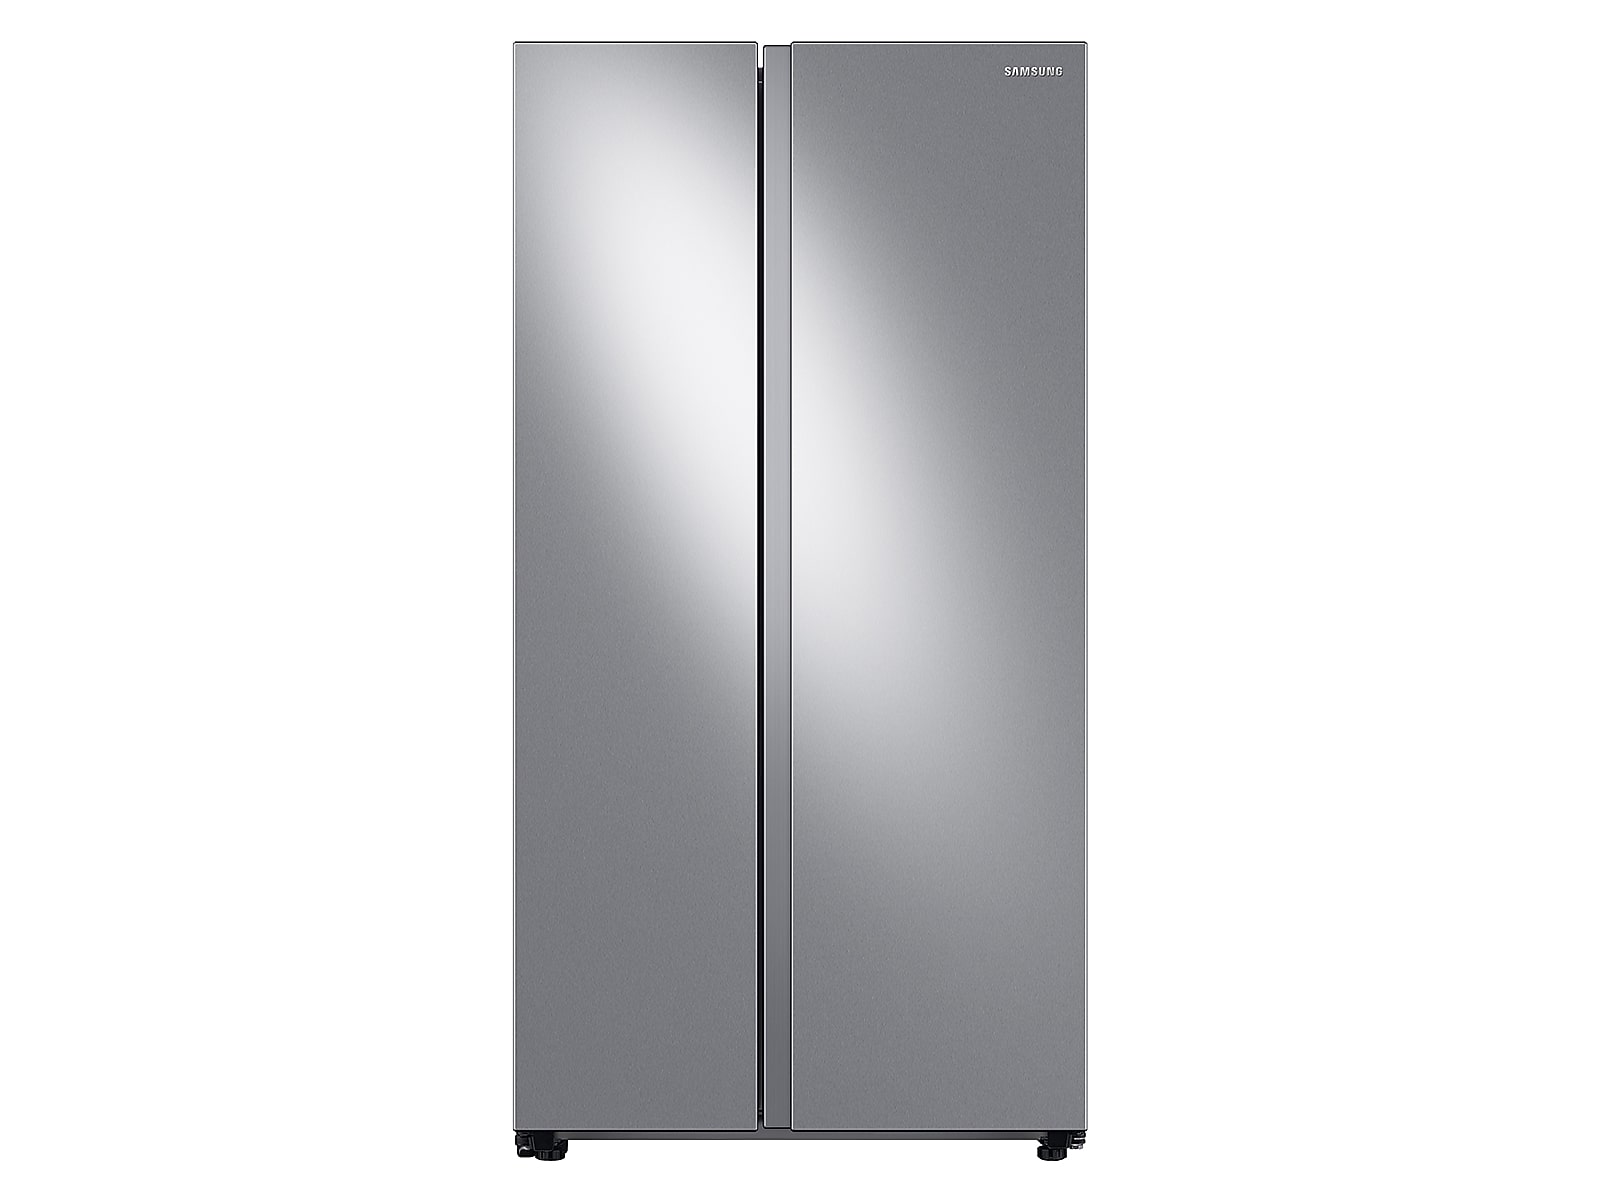 Samsung 28 cu. ft. Smart Side-by-Side Refrigerator in Silver(RS28A500ASR/AA)